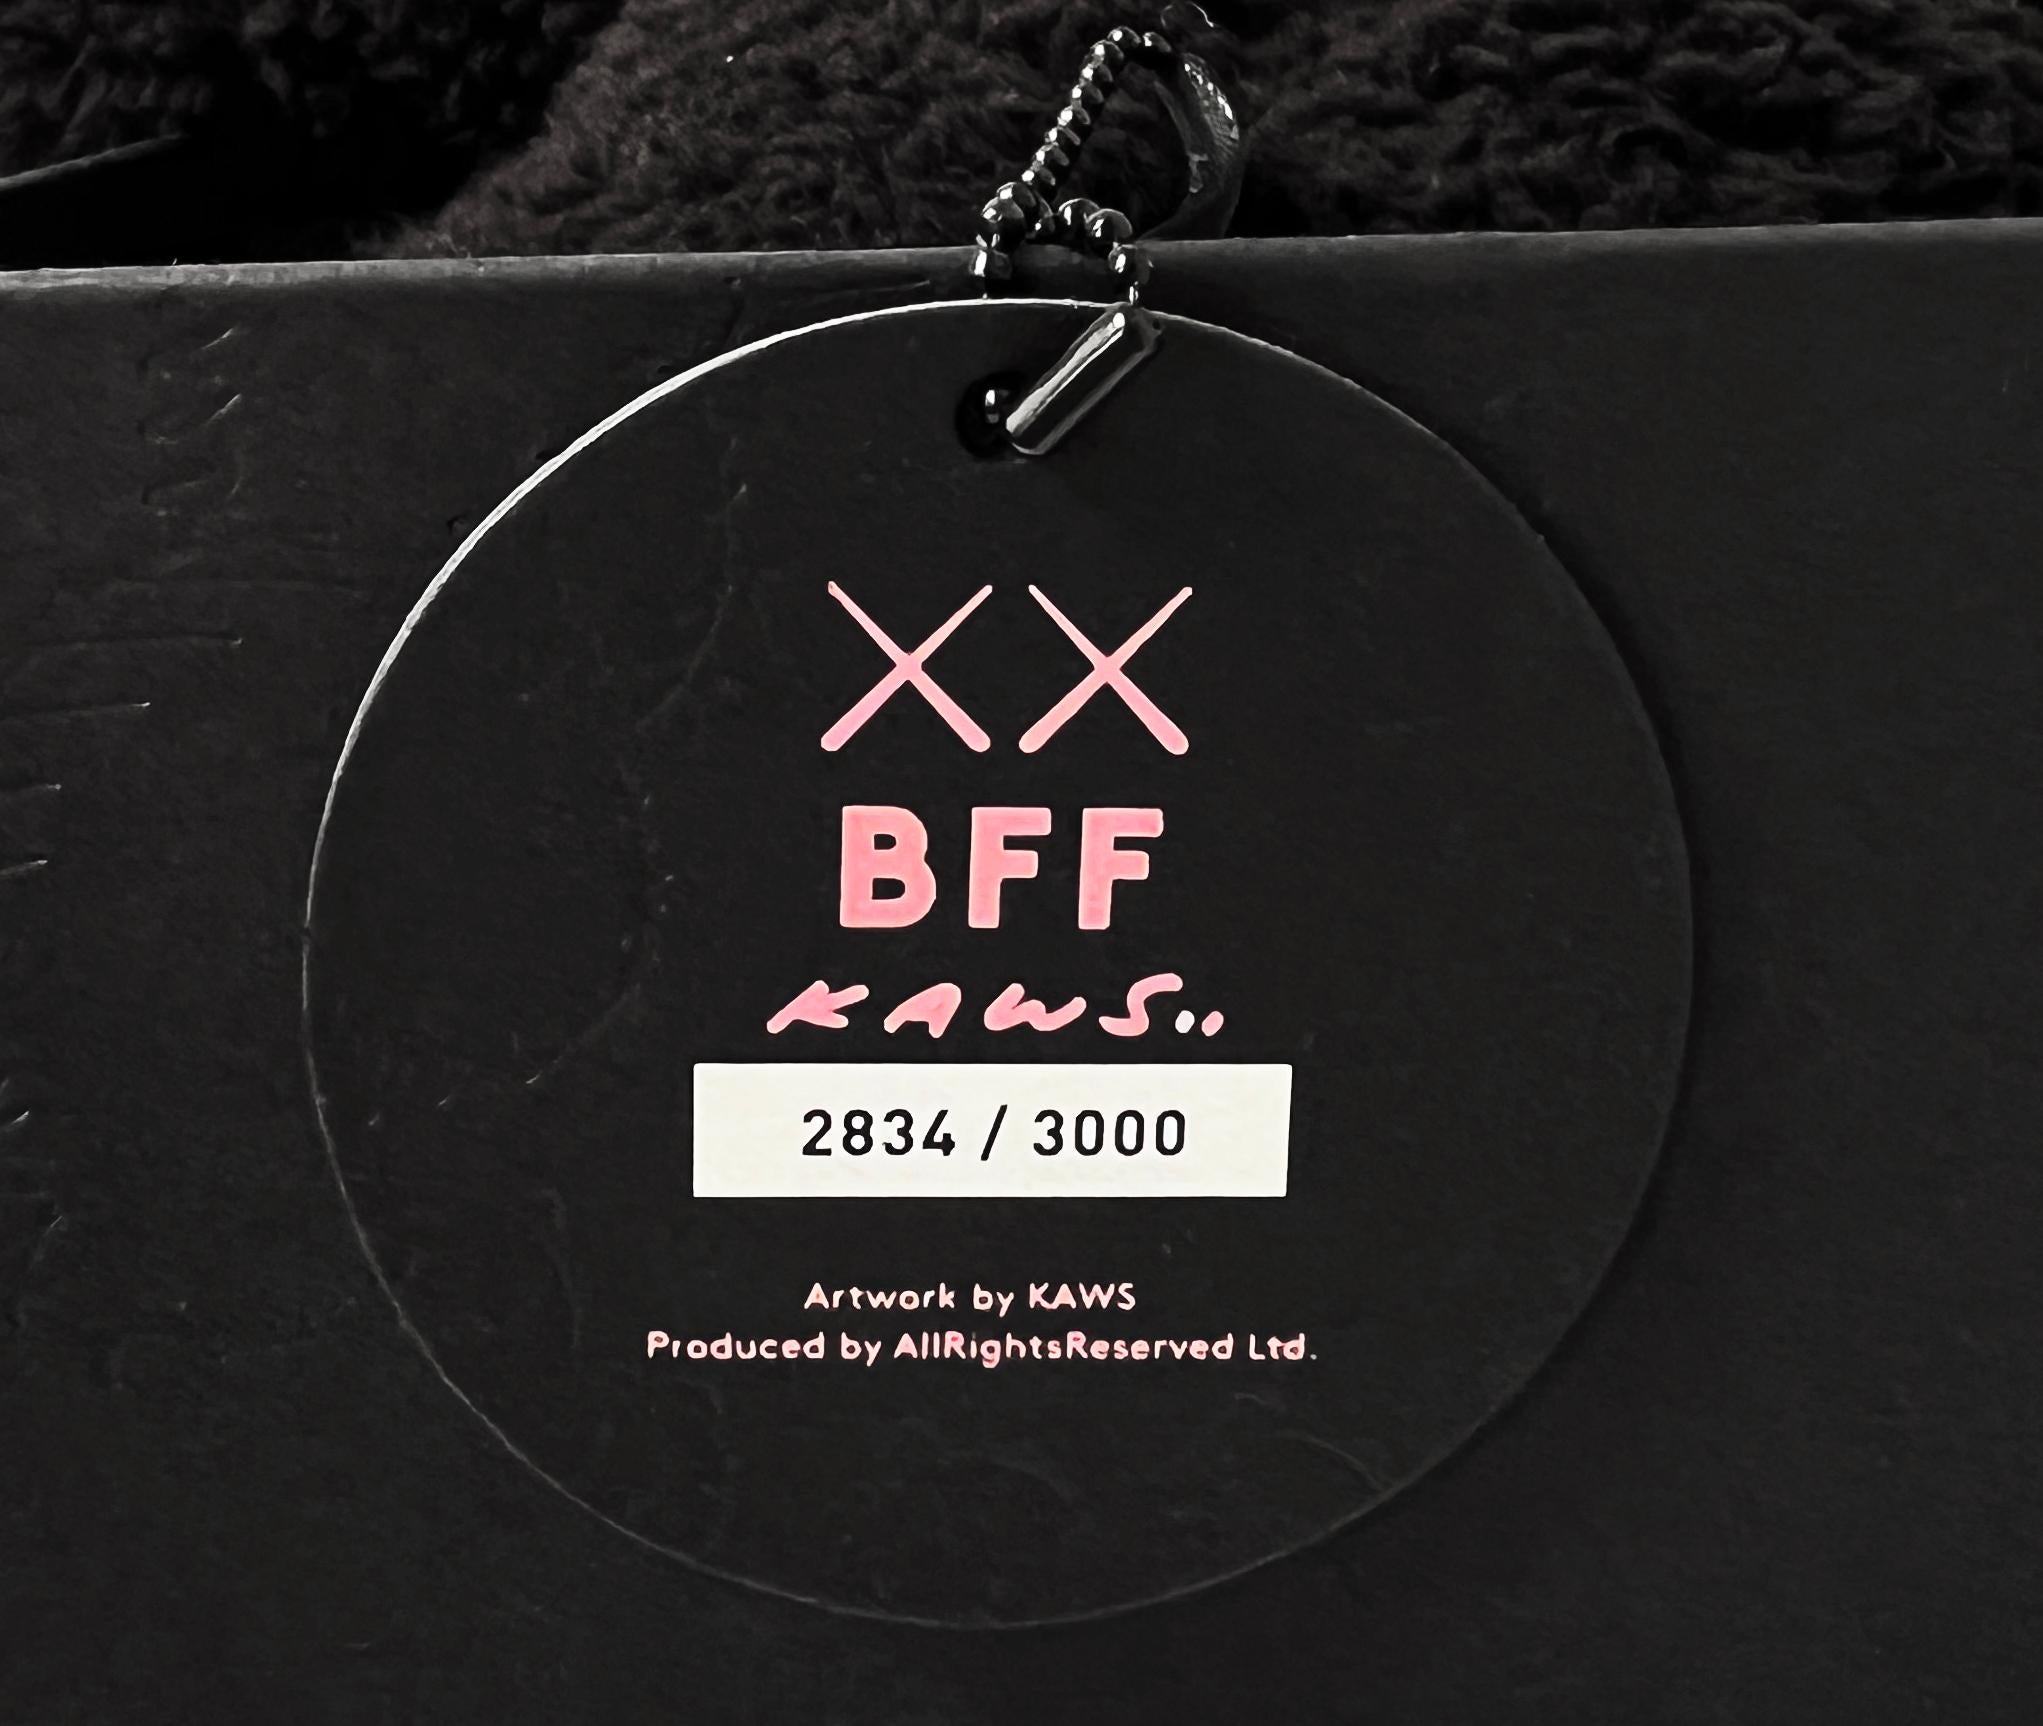 KAWS Black Plush BFF Companion:
This KAWS companion was originally created in conjunction with the exhibition, KAWS: Where The End Starts at the Modern Art Museum of Fort Worth (2016). This plush figure has since sold out. As only 3,000 pieces were